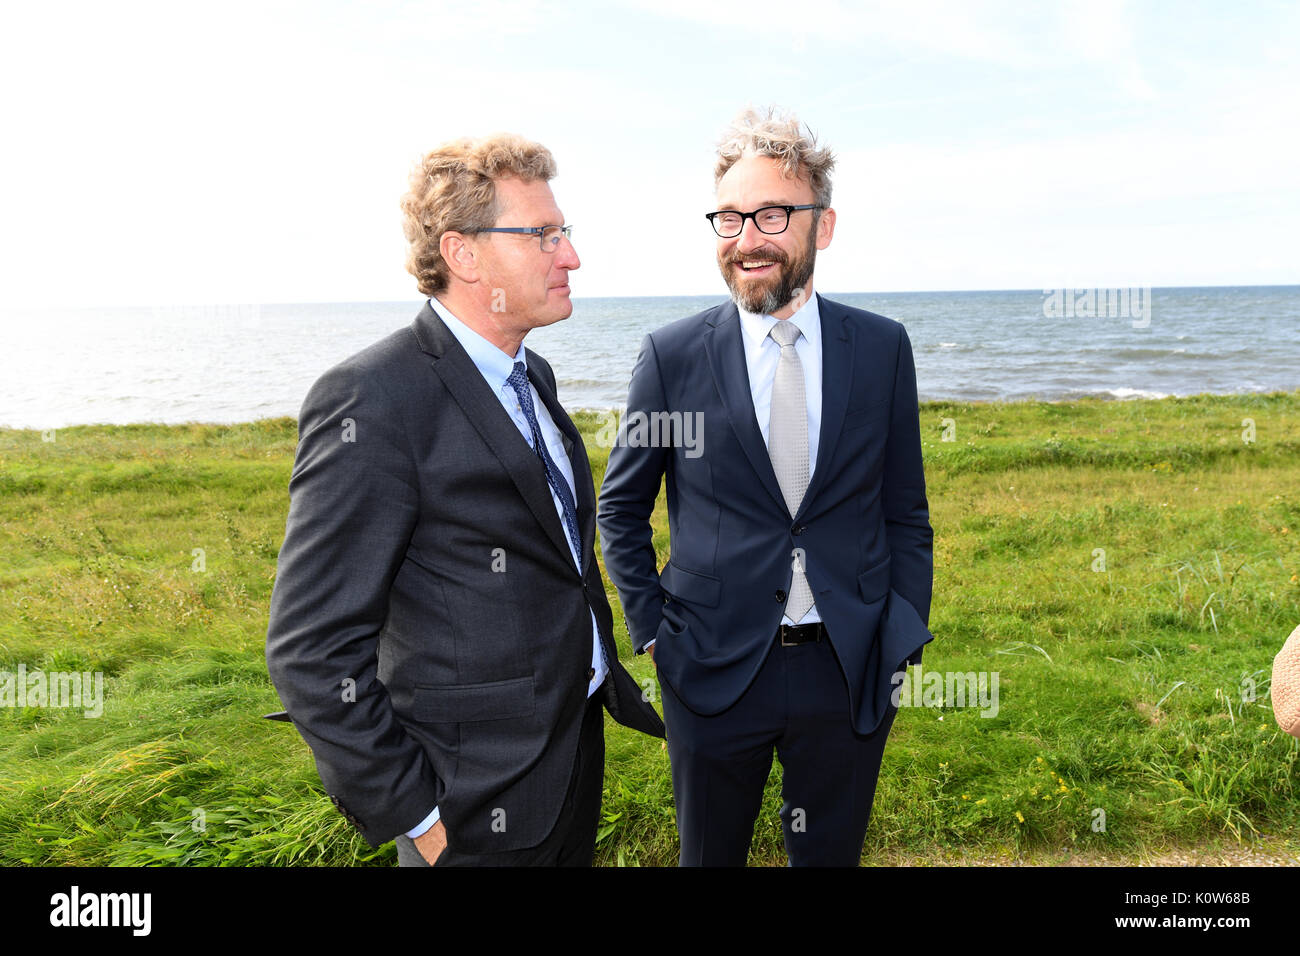 Denmark. 25th August, 2017. The Economy Minister of the state of Schleswig-Holstein, Bernd Buchholz (L), speaking with his Danish counterpart Ole Birk Olesen in Rødbyhavn, Denmark, 25 august 2017. The topic of the talks was the future Fehmarnbelt tunnel. Photo: Carsten Rehder/dpa/Alamy Live News Stock Photo